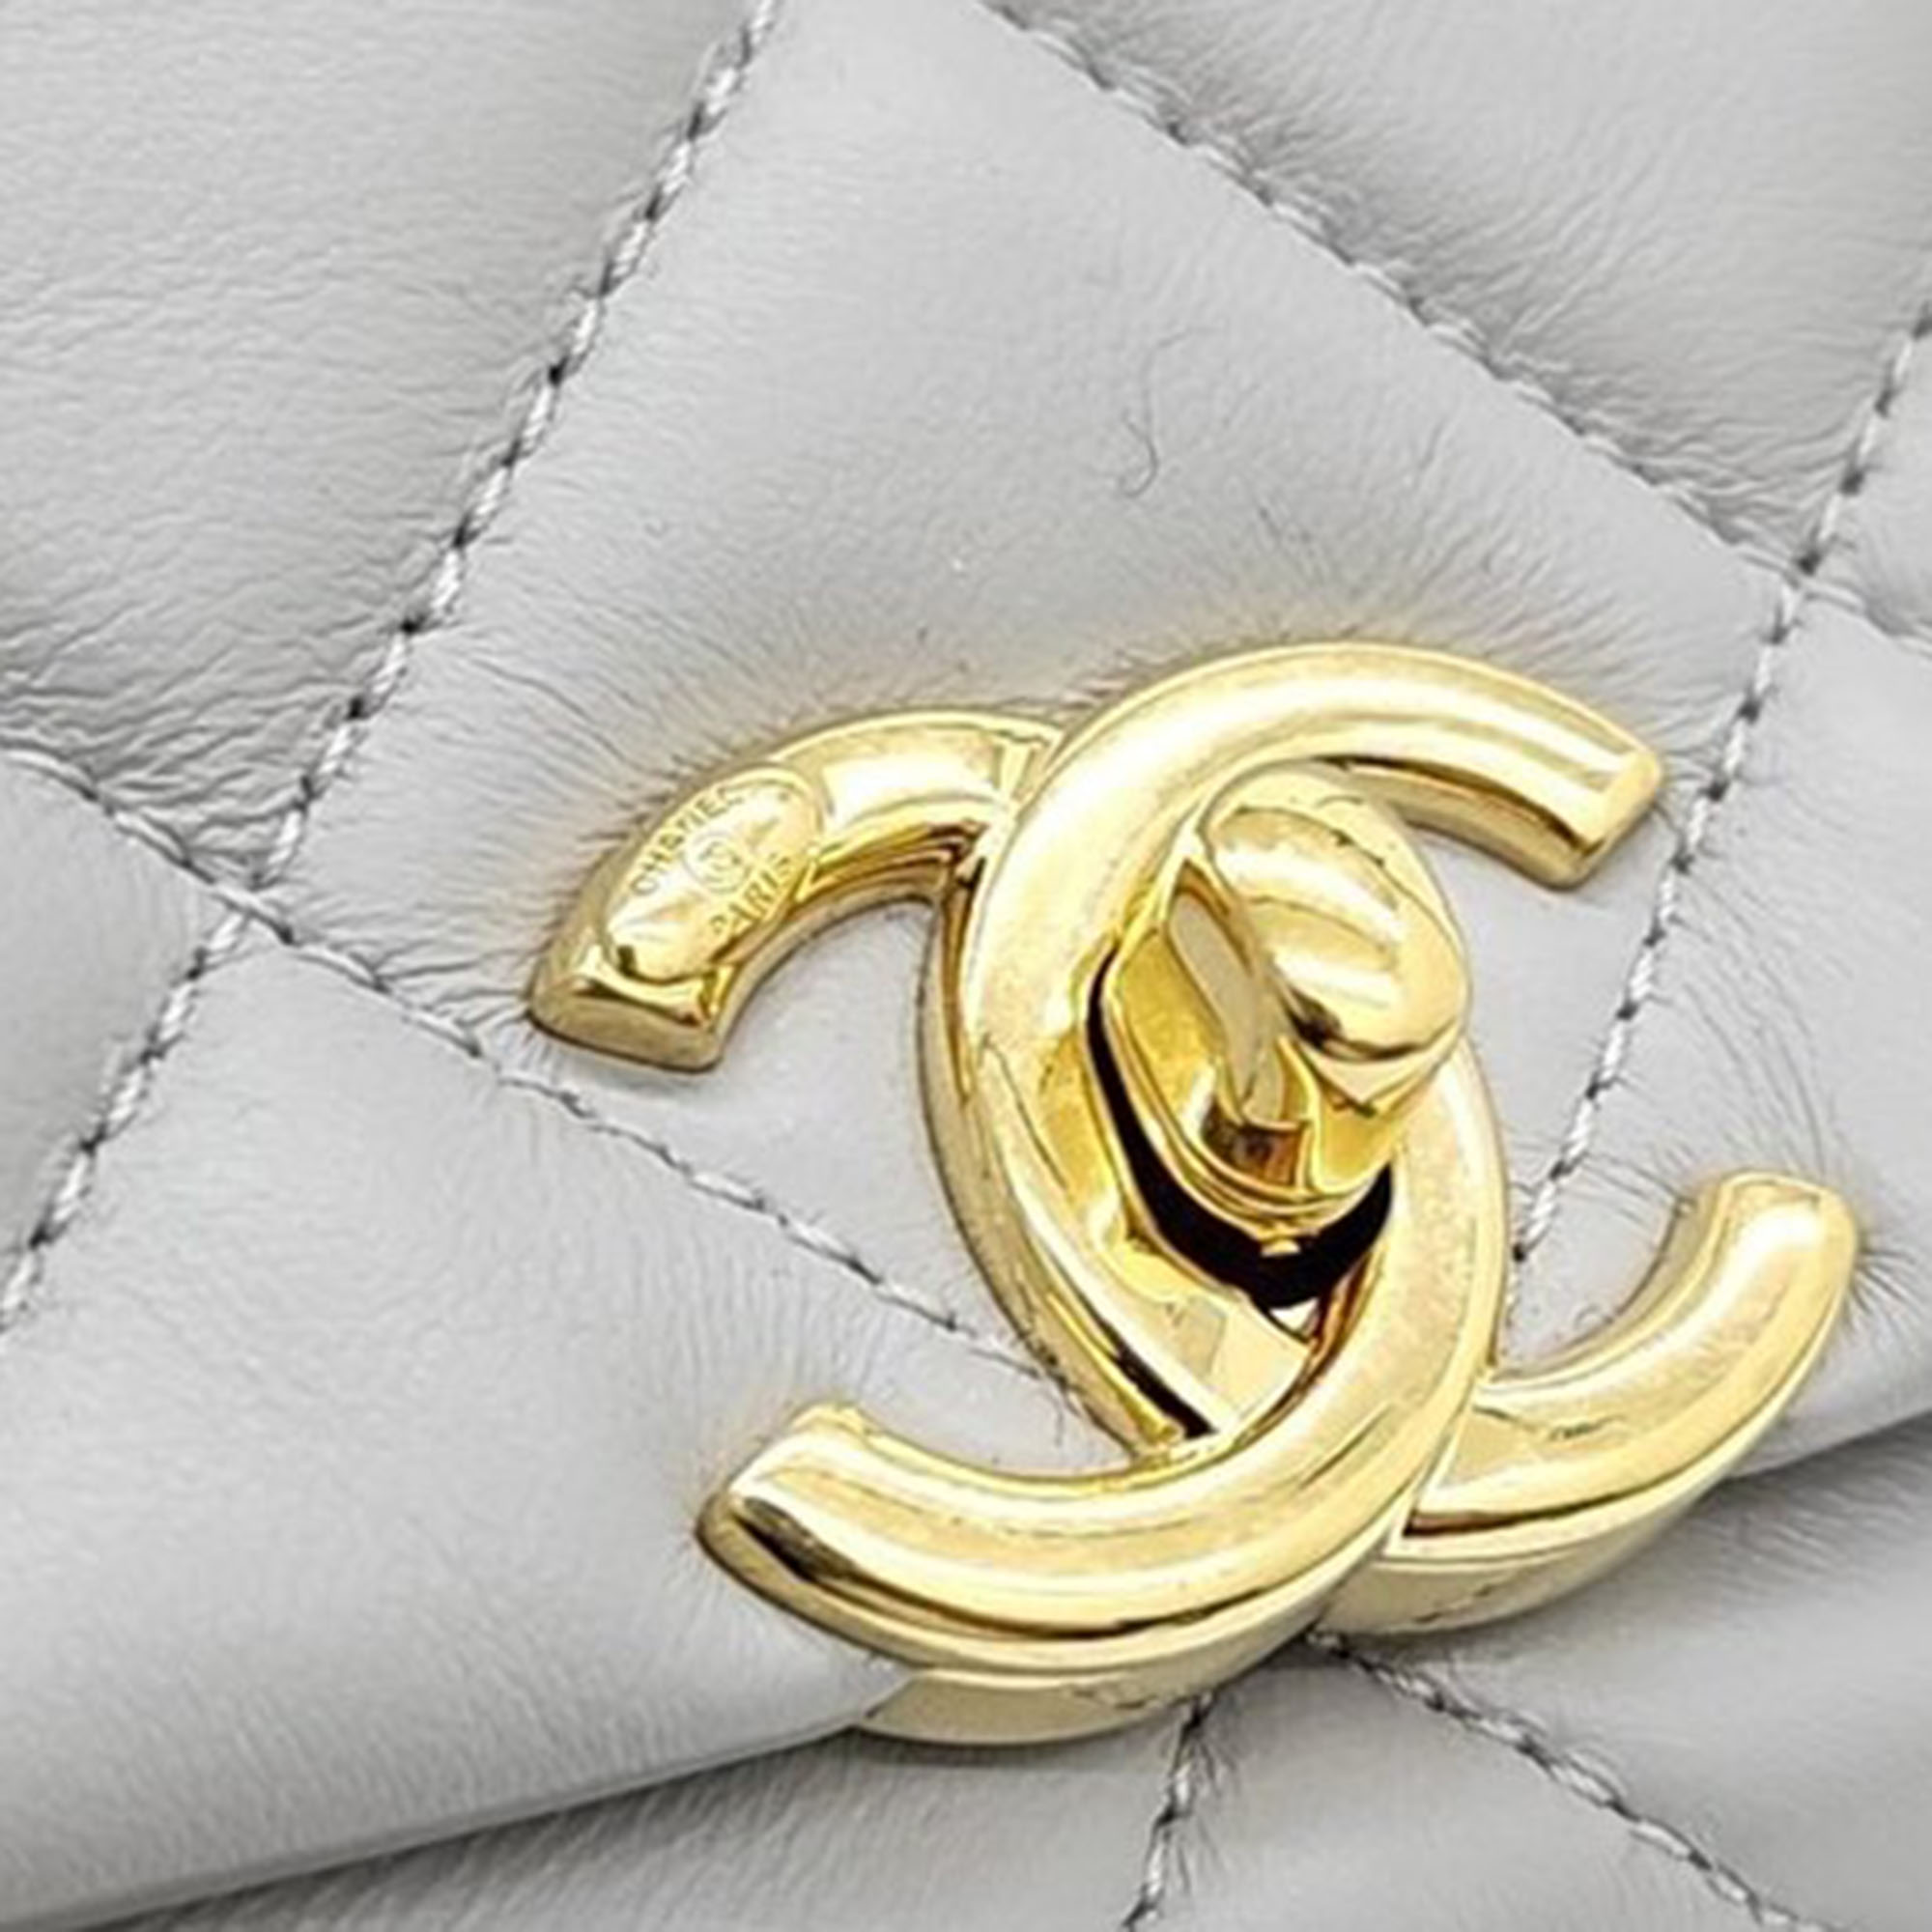 Chanel Flap Chain Tote And Shoulder Bag